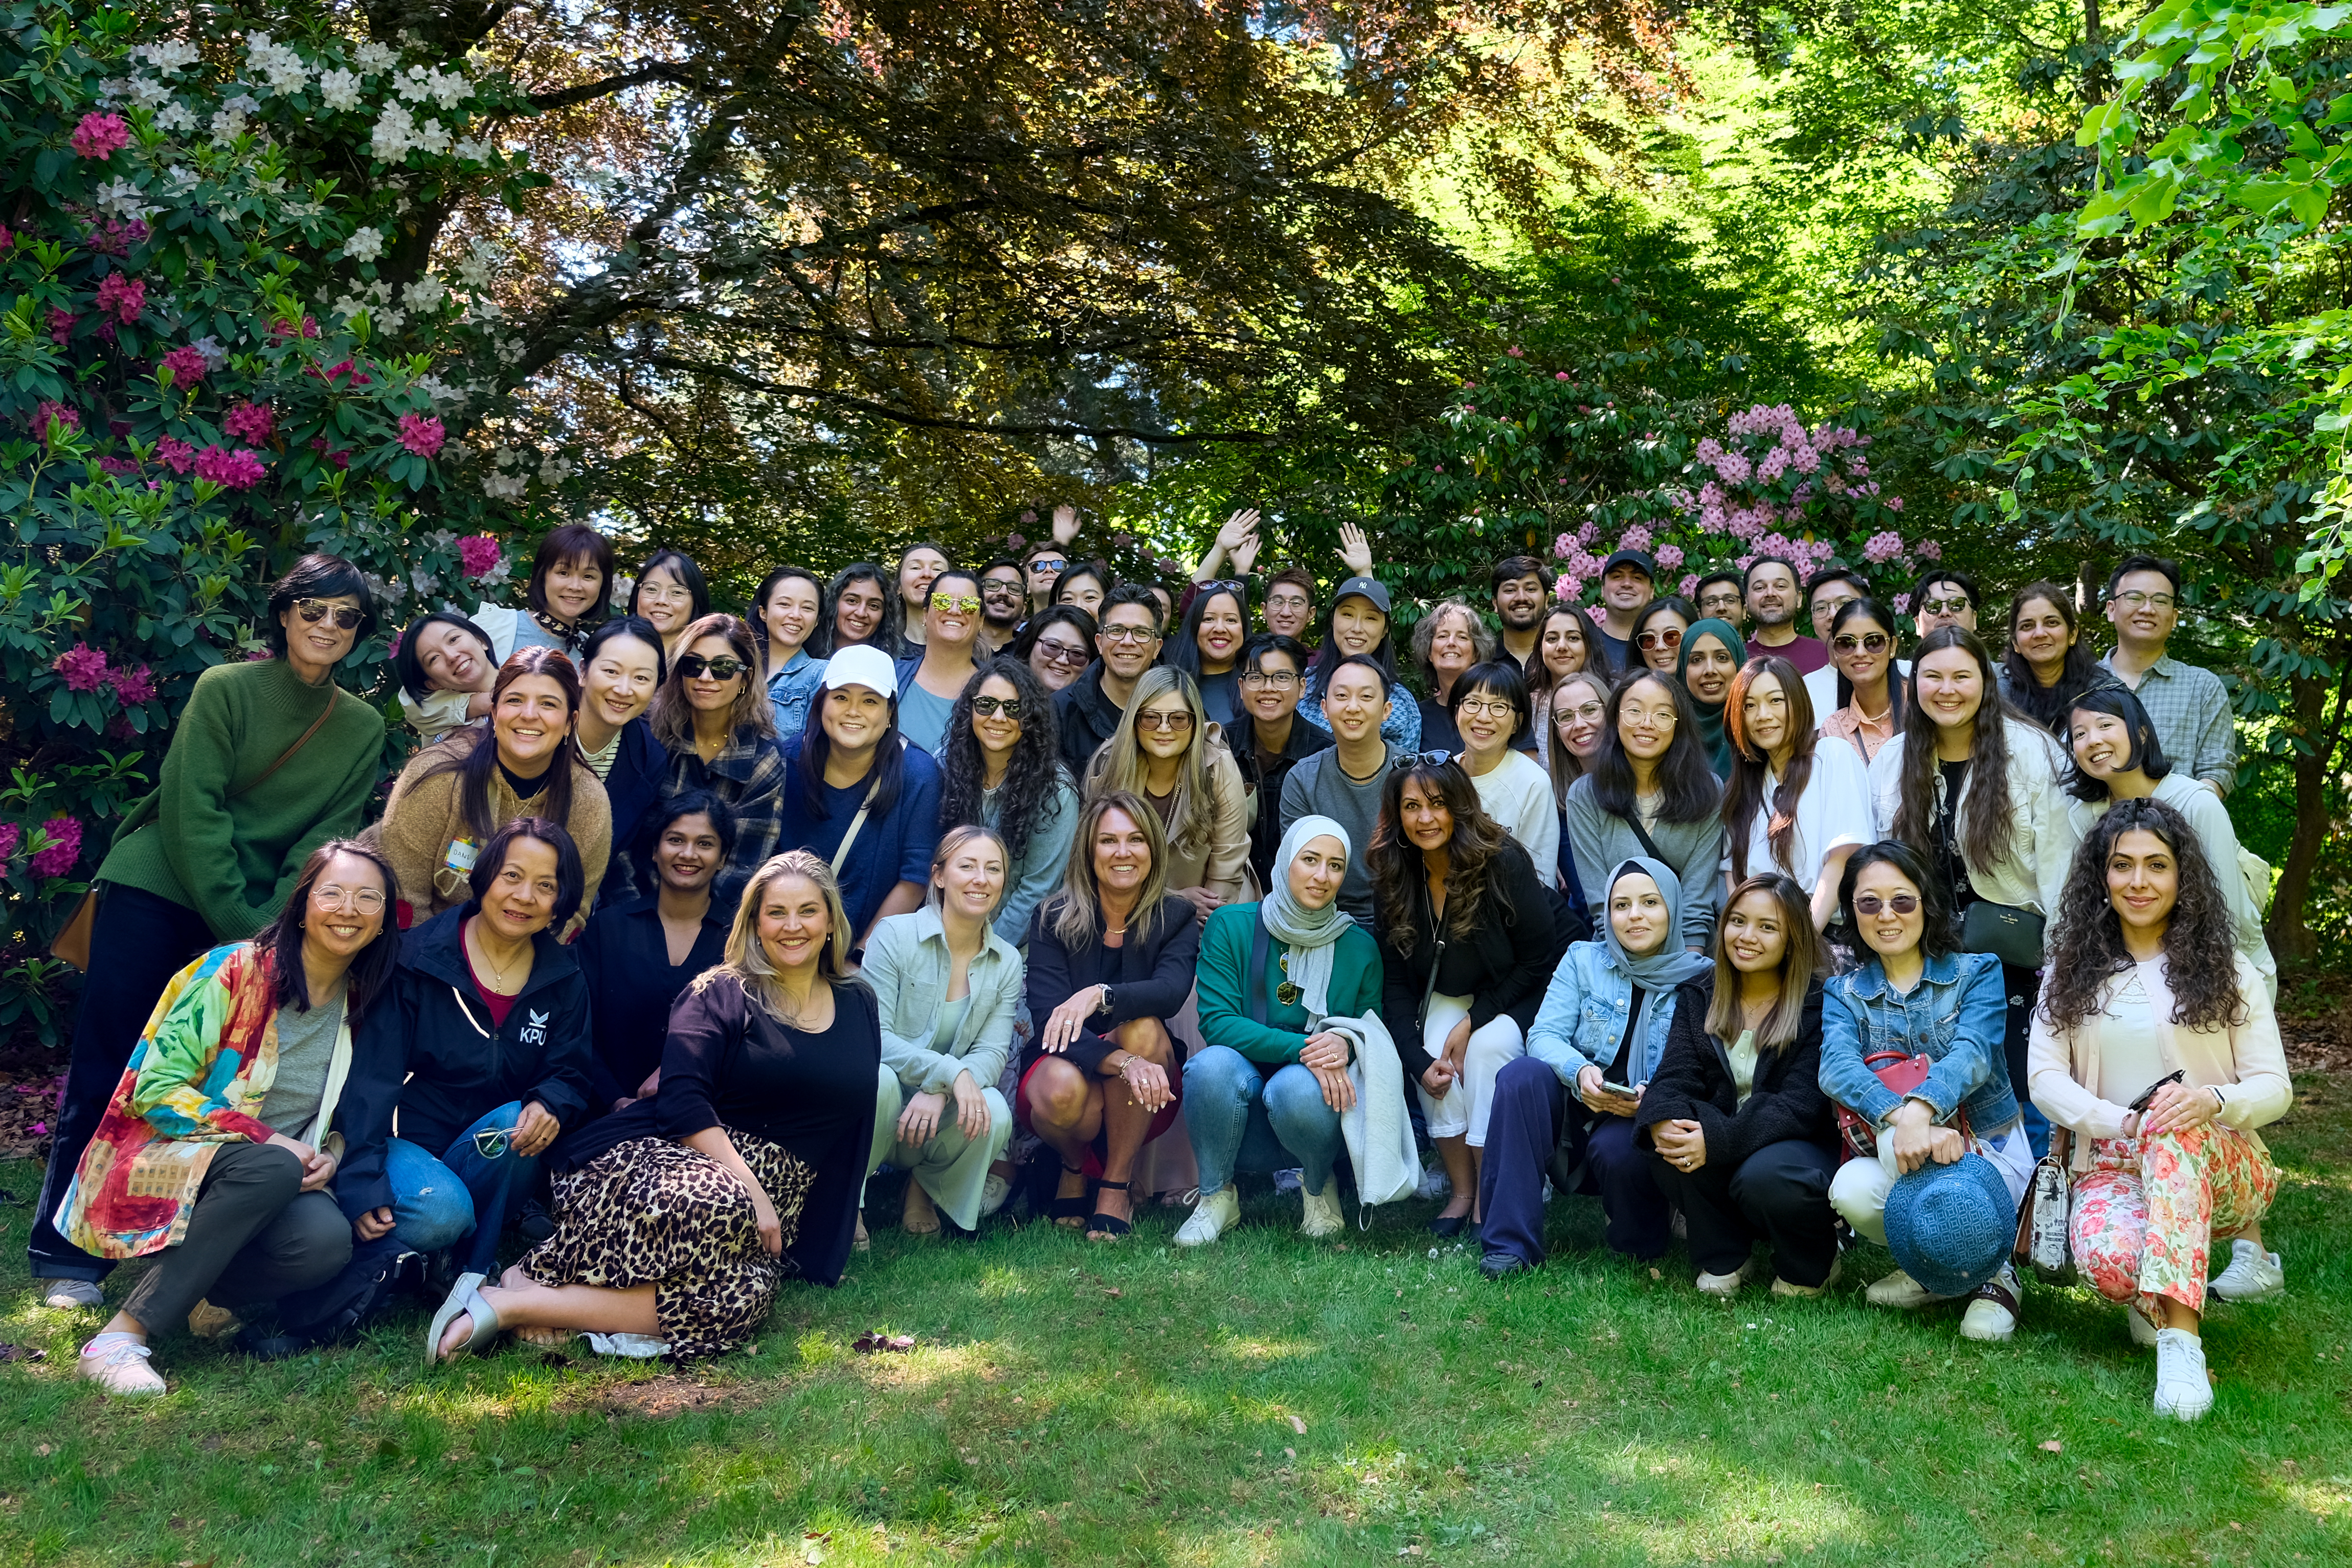 Photo of KPU International staff in a group, standing outside on a grassy lawn and behind are green bushes with flowers and large leaves. 